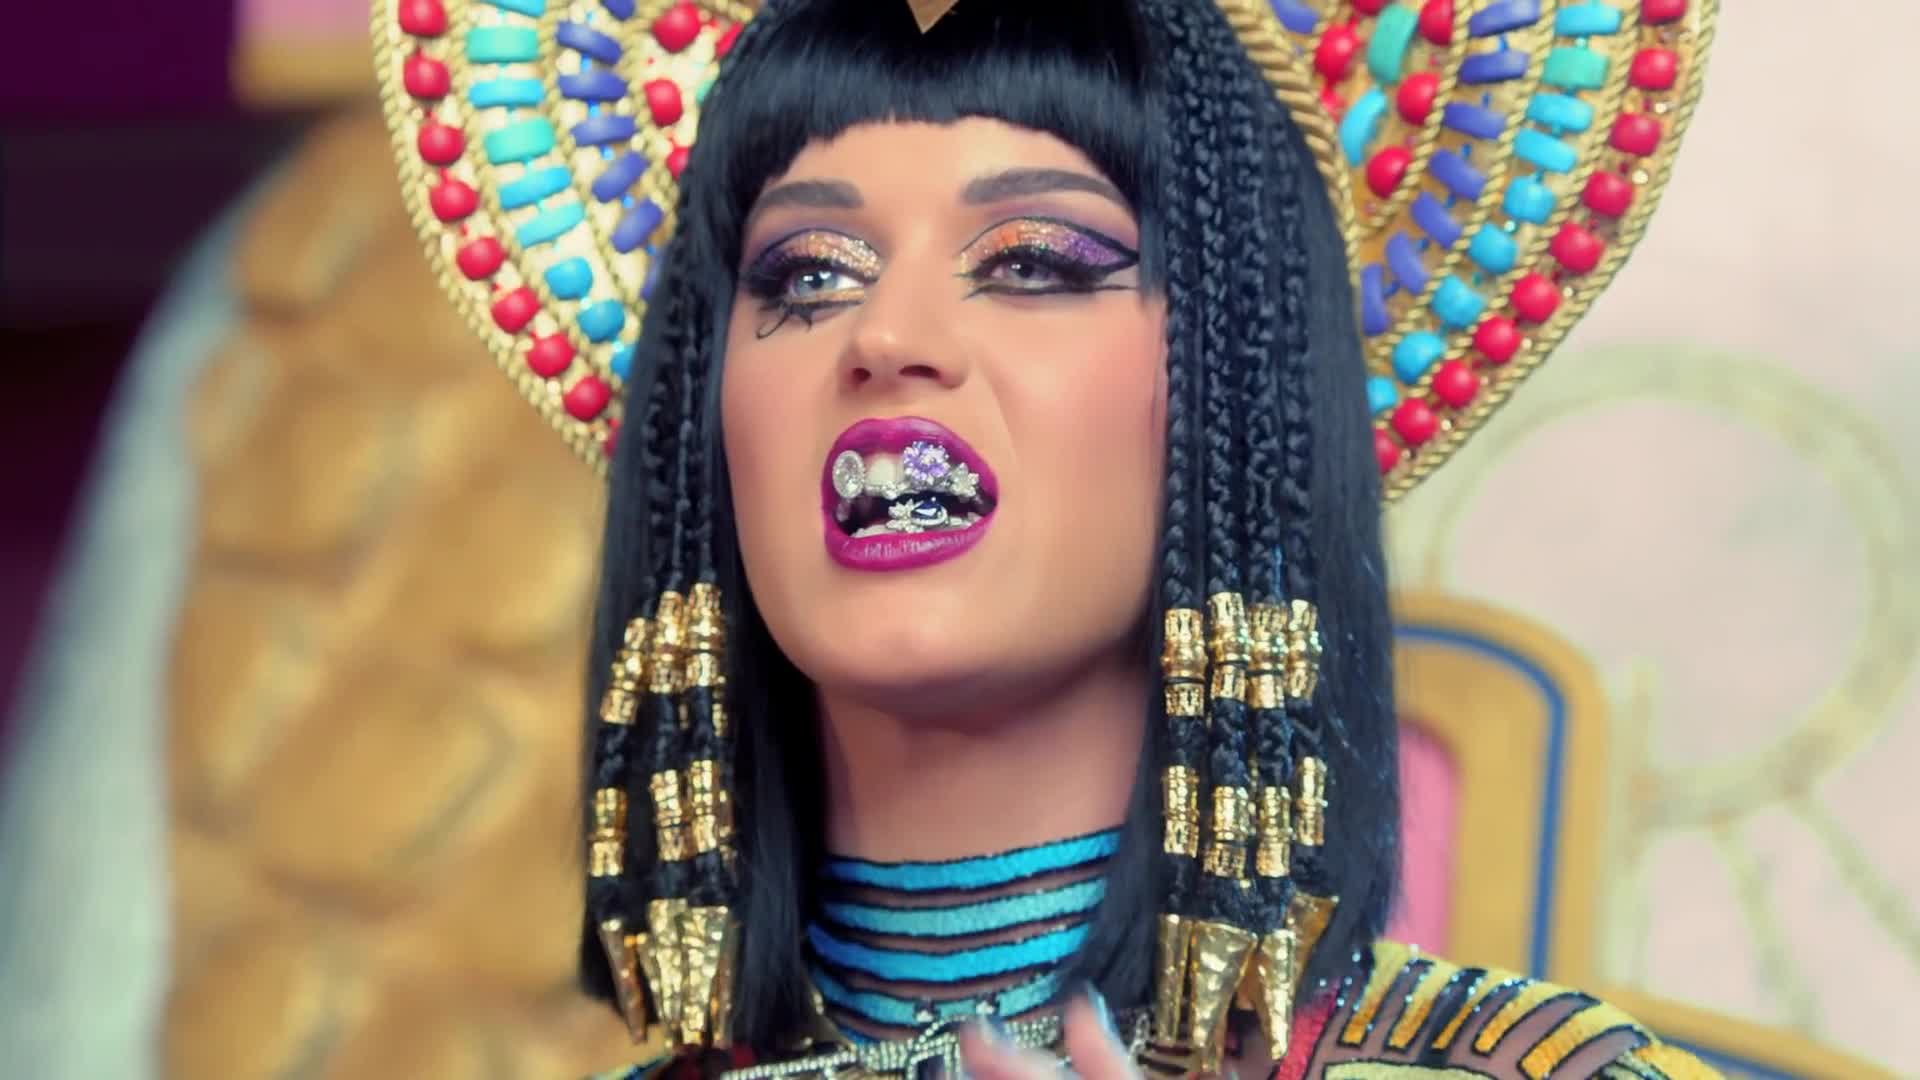 Katy Perry Dark Horse video causes offence after 